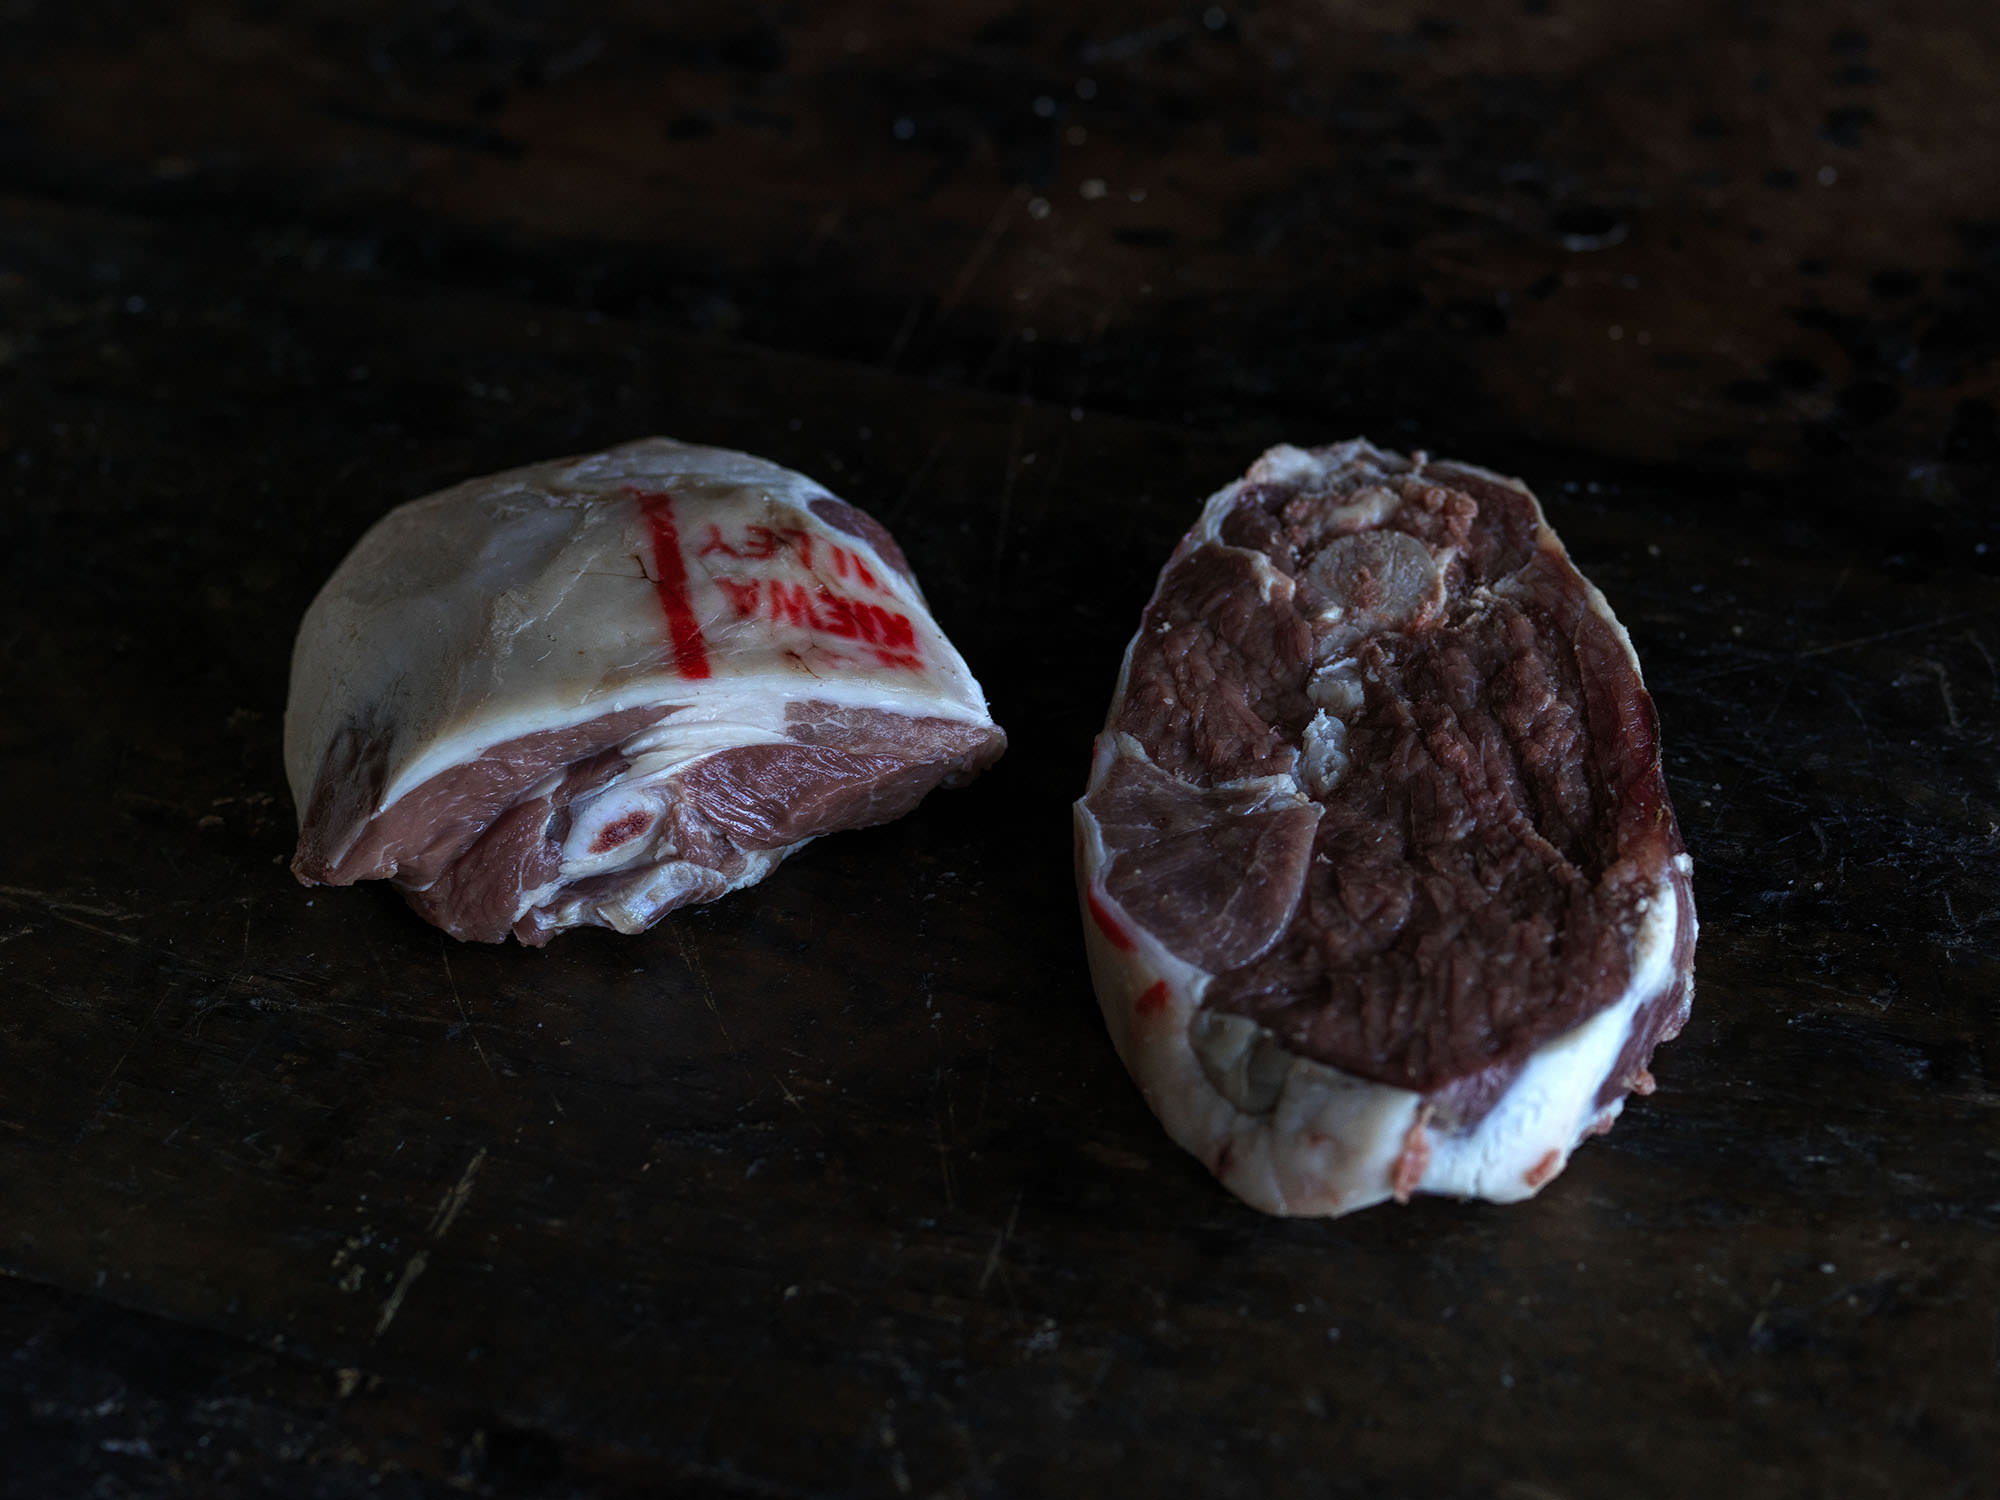 Two very different cuts derived from the leg - the lamb rump and osso bucco.